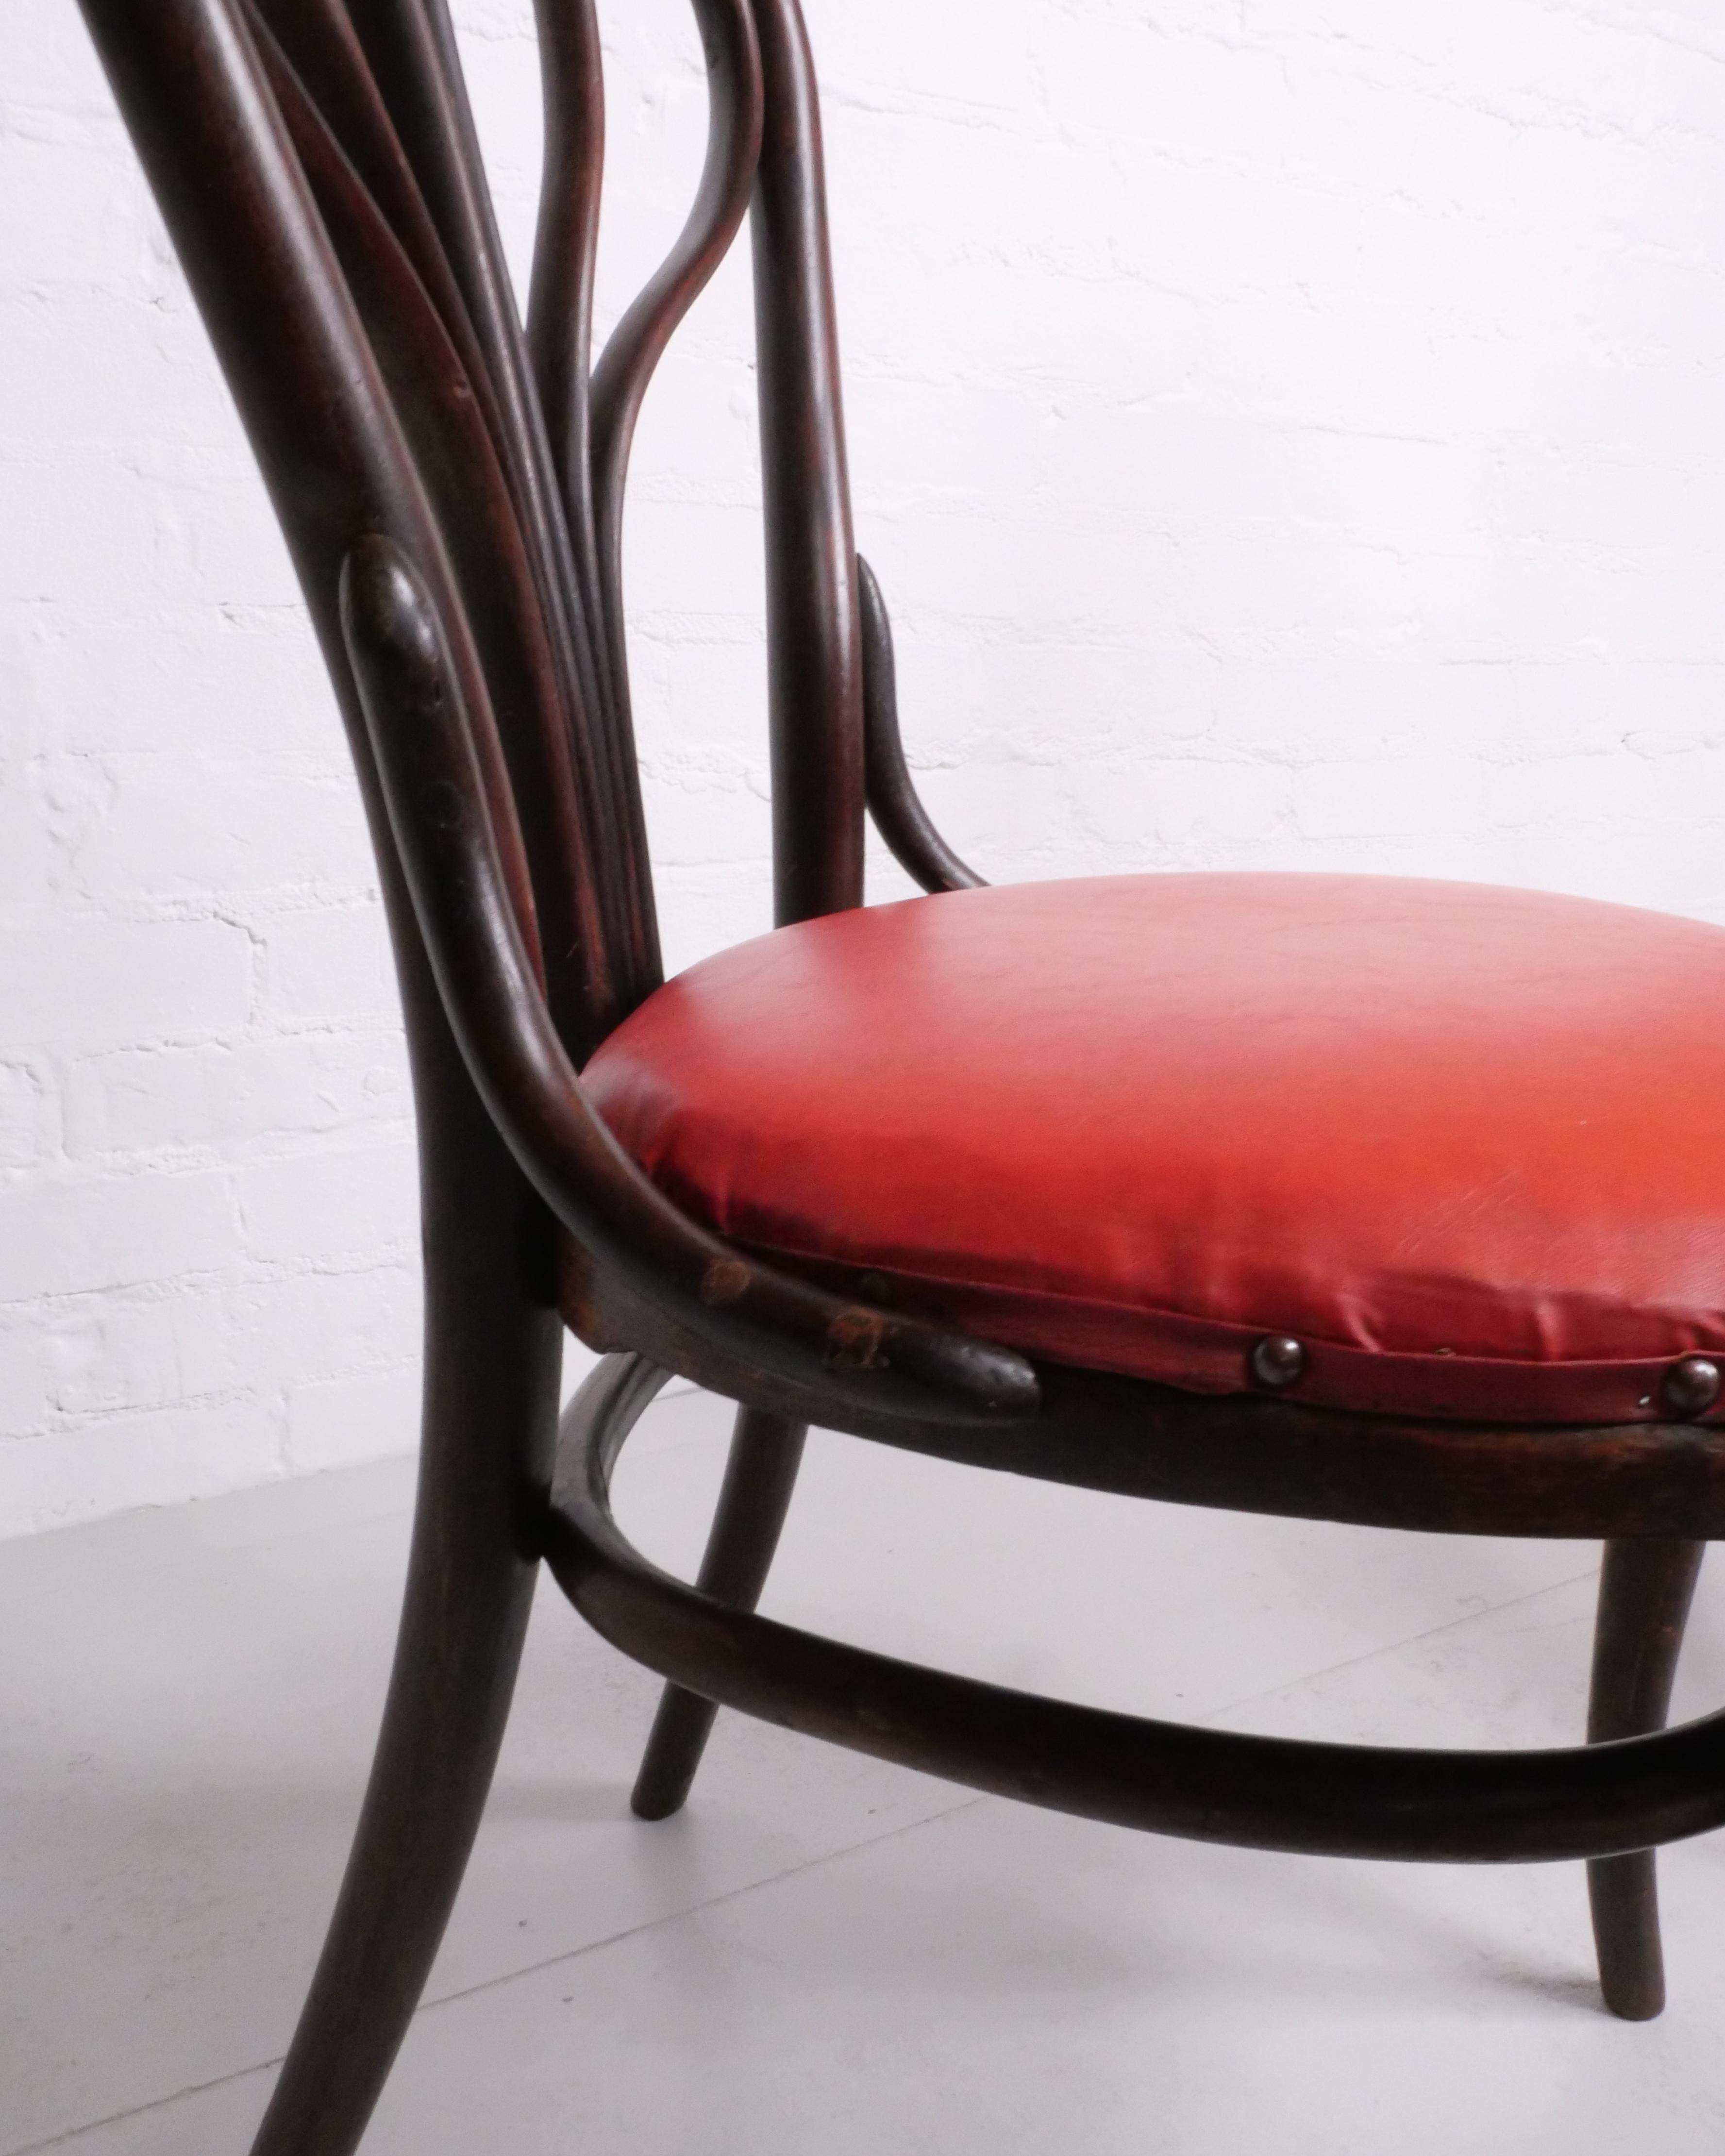 Set of 4 no.25 dining chairs by Gebrüder Thonet, c. 1870 For Sale 4